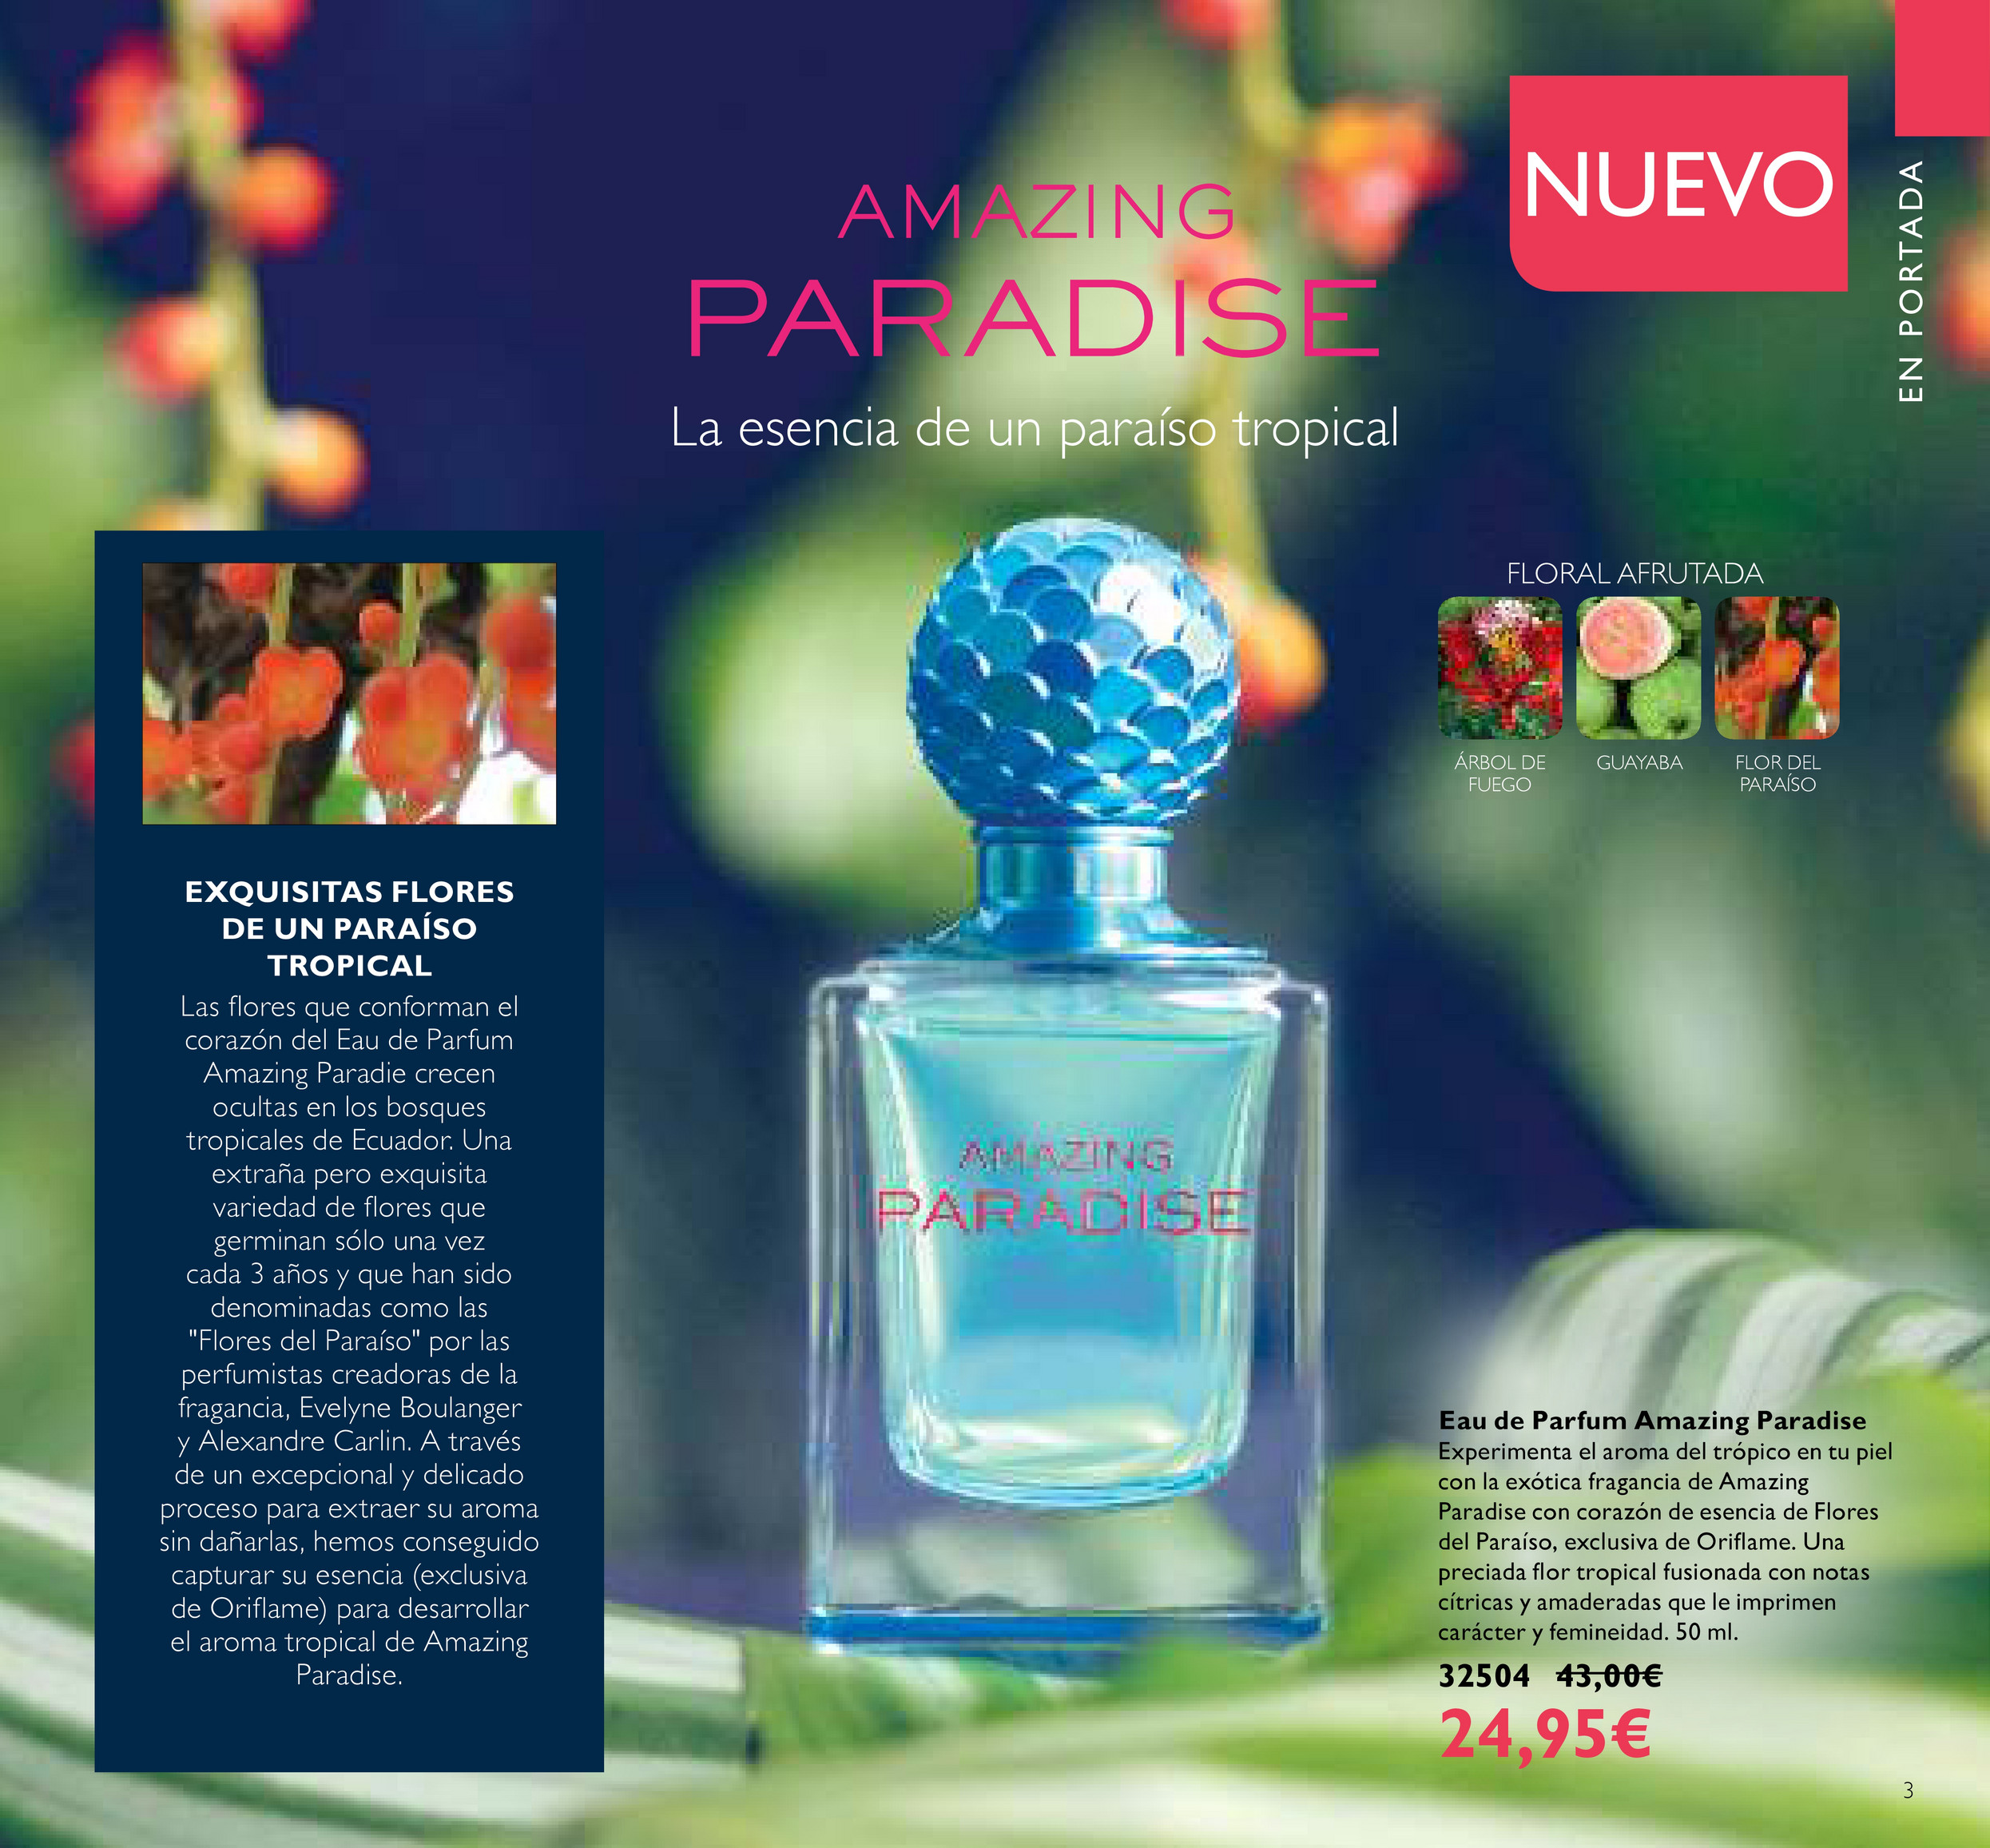 My publications - Catalogo 10 Oriflame - Page 110-111 - Created with  